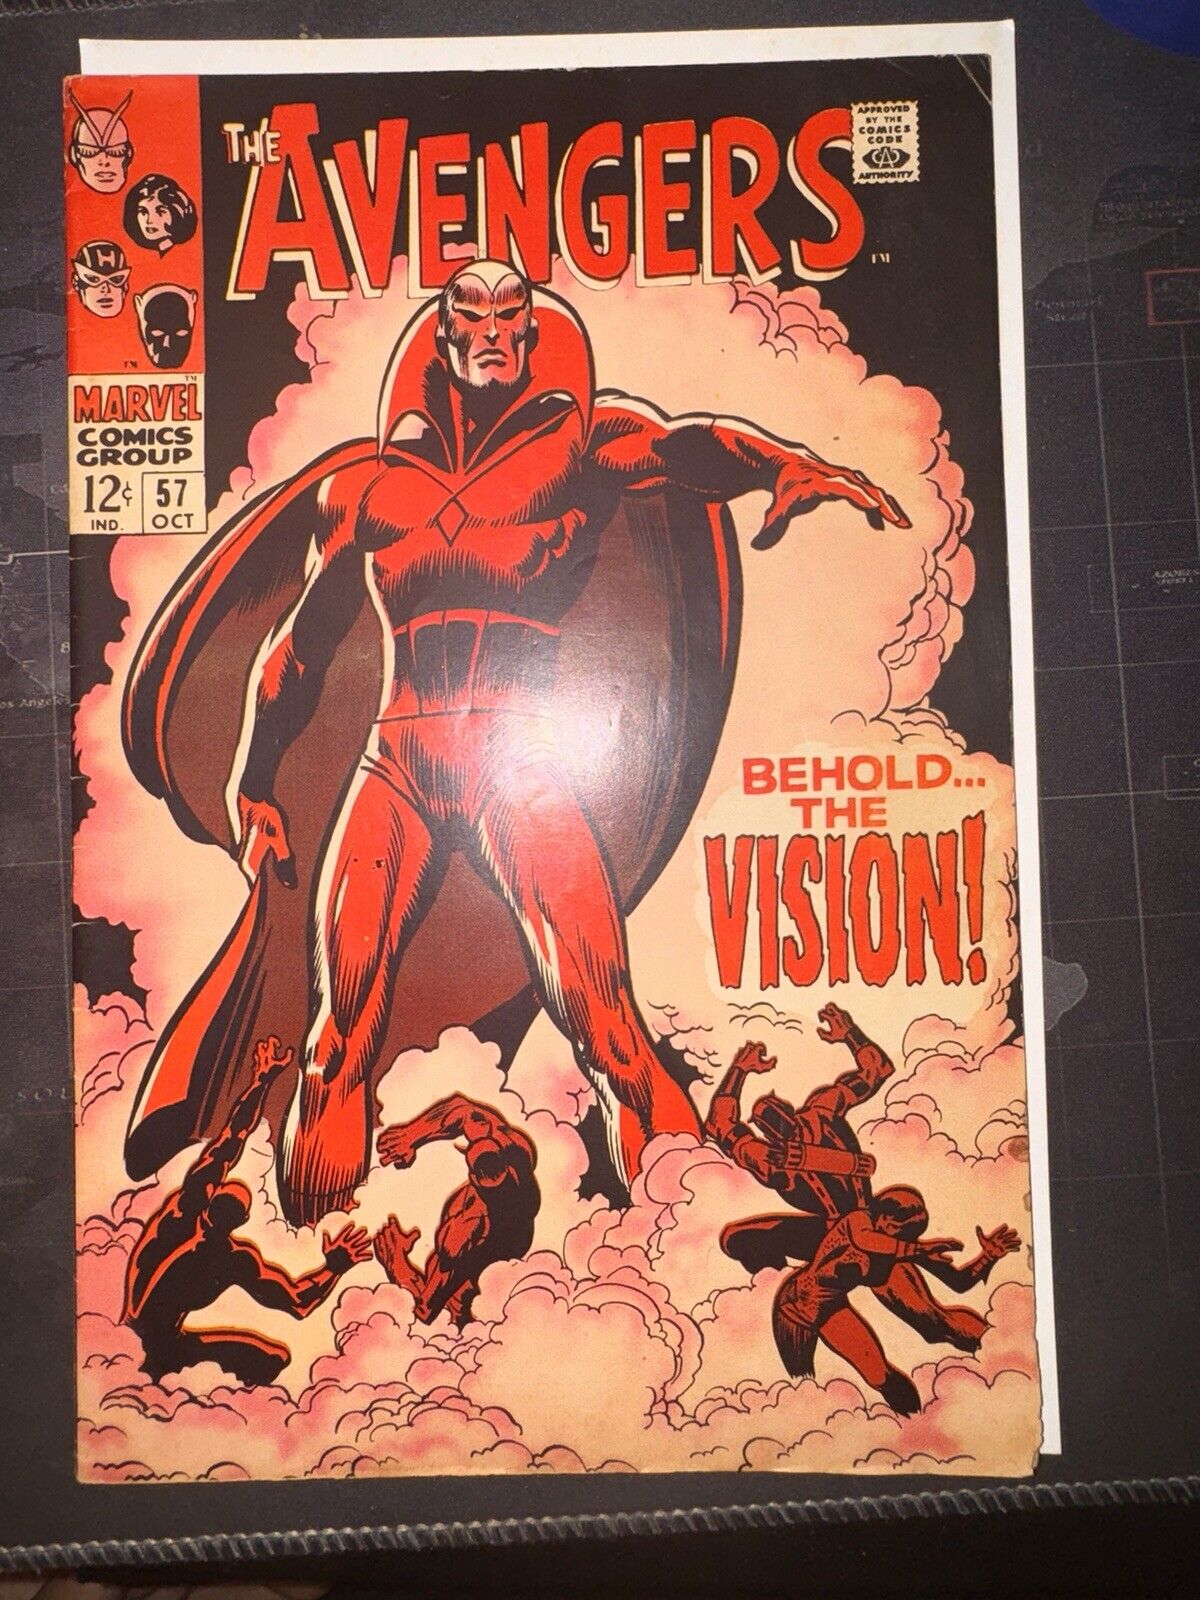 THE AVENGERS #57 (1968) - 1st appearance of The Vision